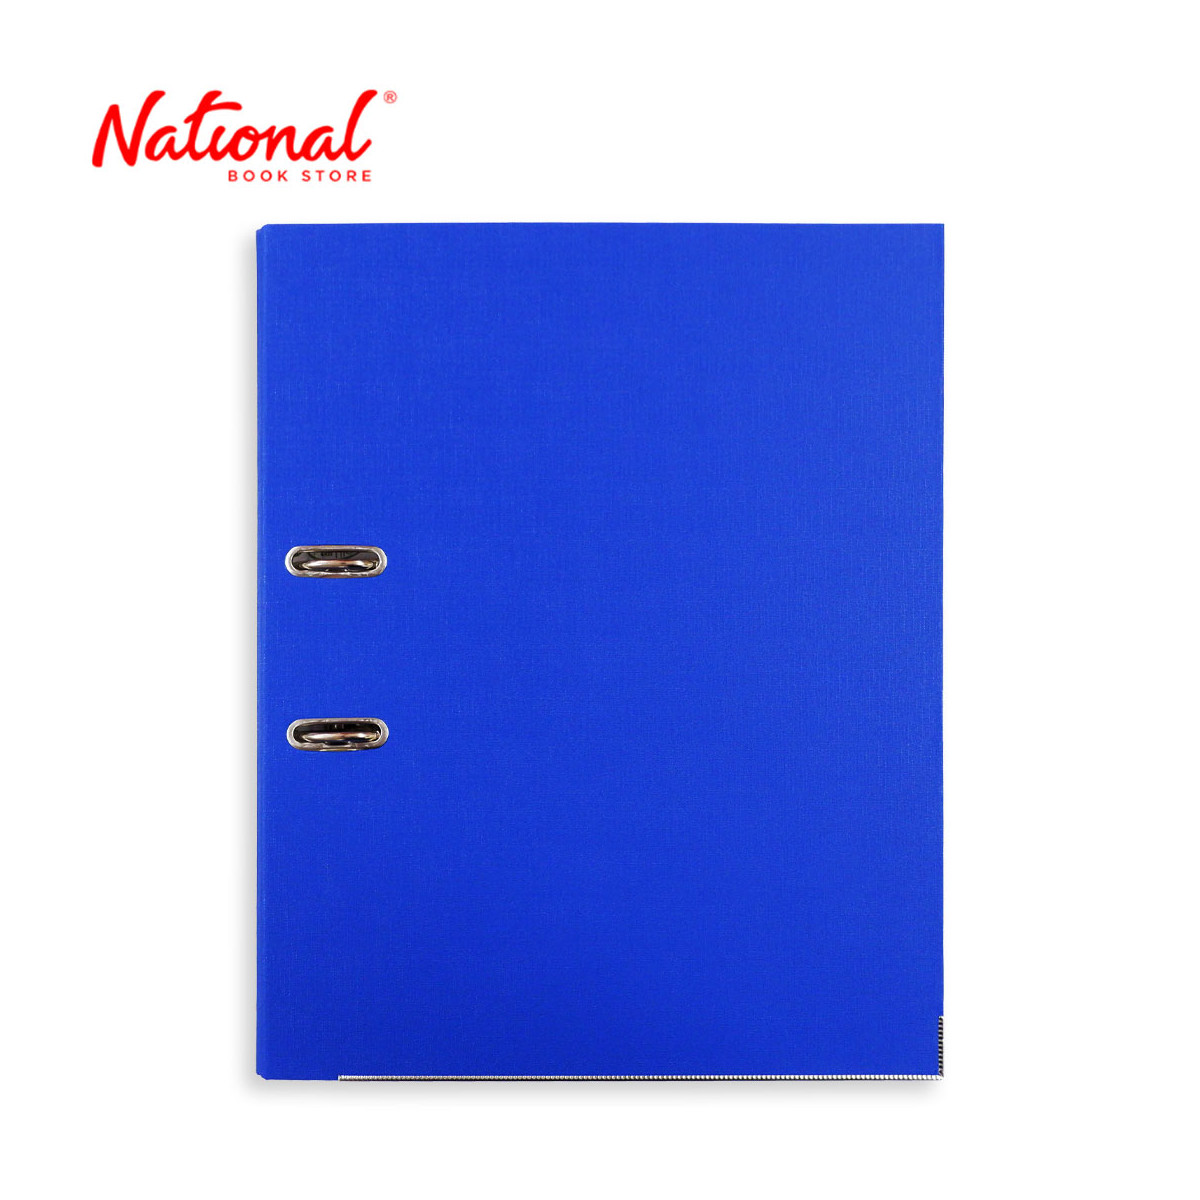 Starfile Lever Arch File 7cm 3 inches Vertical 276D, Blue - Office Supplies - Filing Supplies